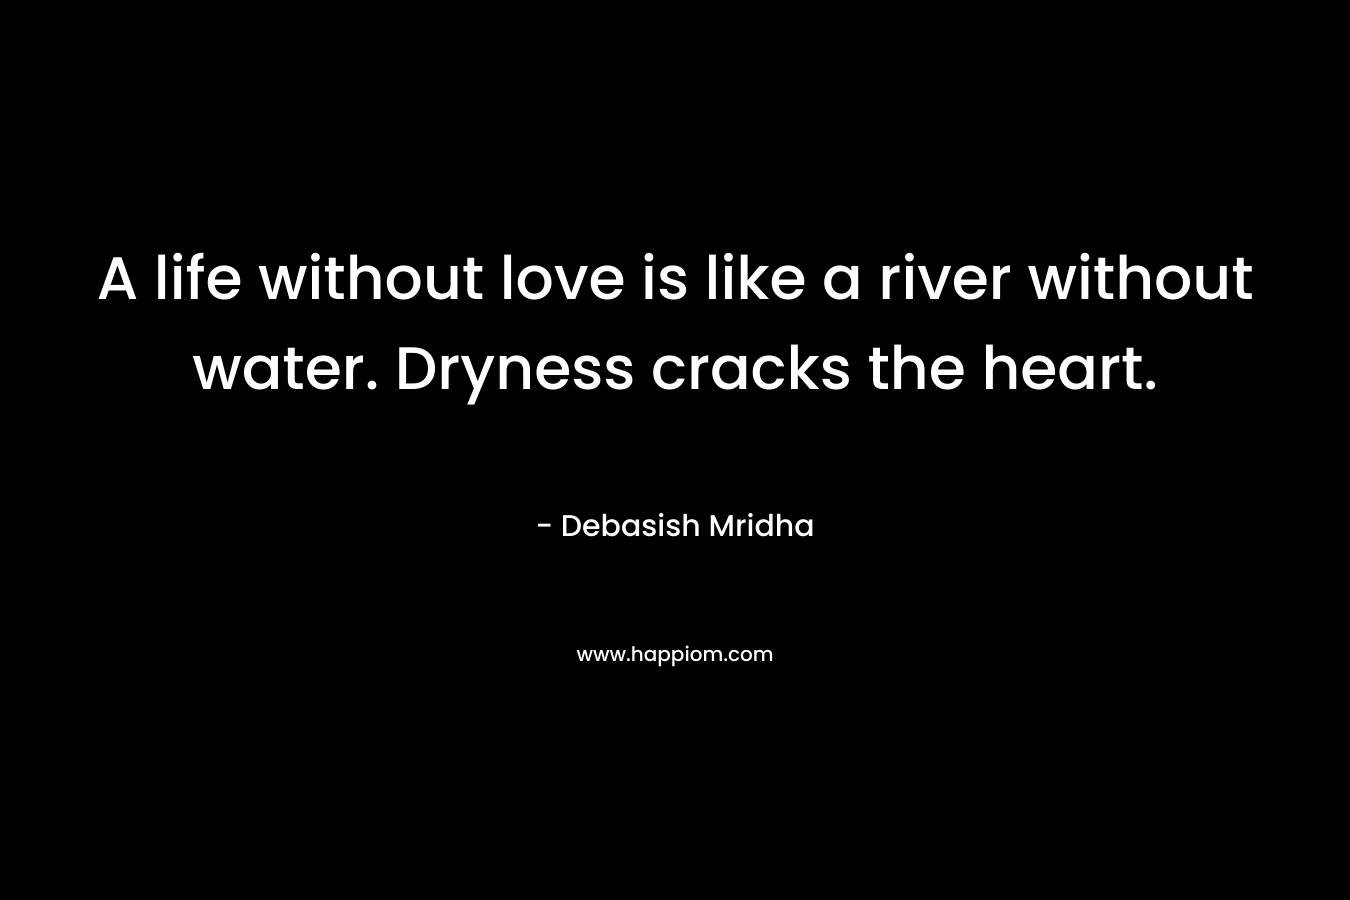 A life without love is like a river without water. Dryness cracks the heart.